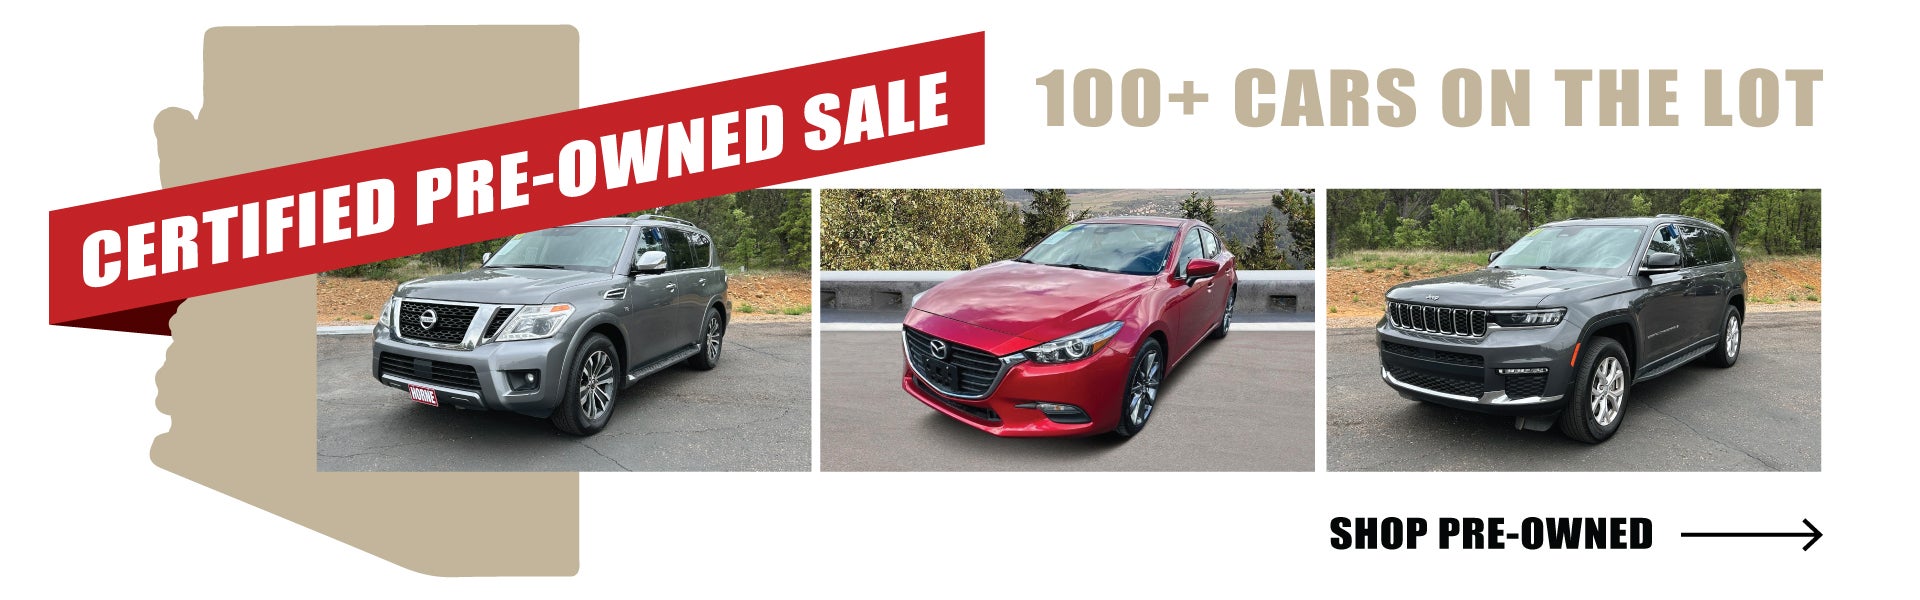 Pre-Owned Vehicles at Horne Auto Center